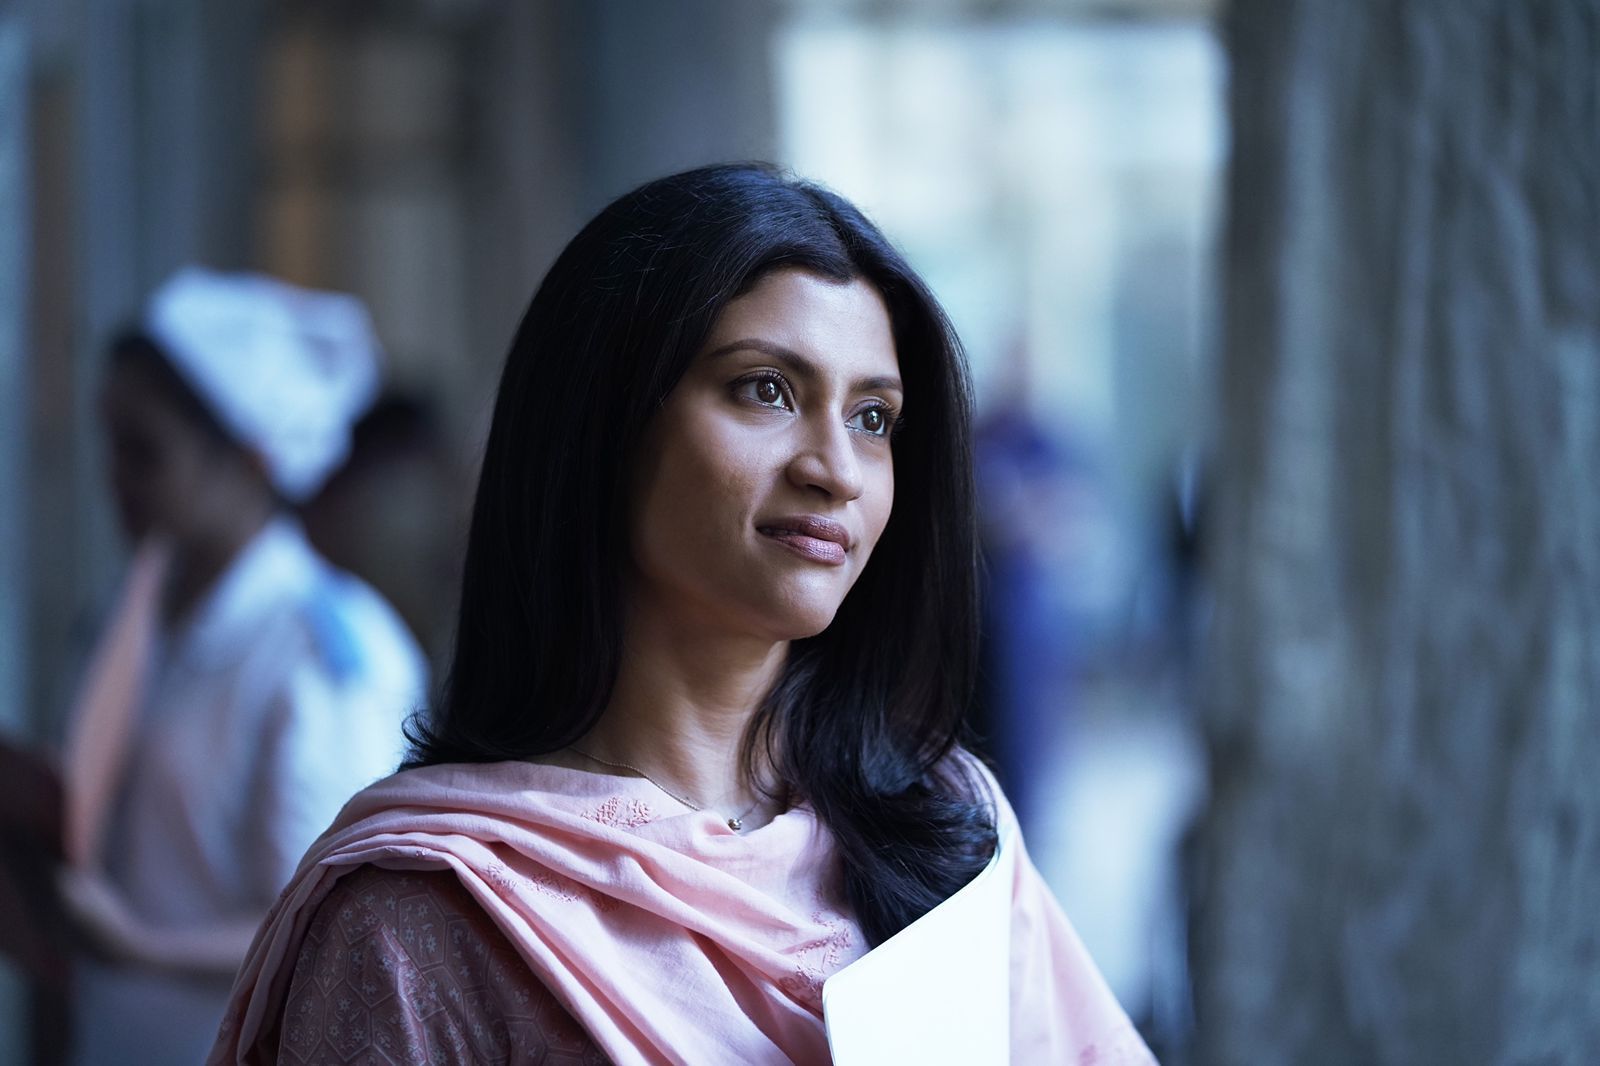 Konkona Sen Sharma on Mumbai Diaries 26/11: "hadn't come across a script so intense, honest and emotional, with so much humanity"